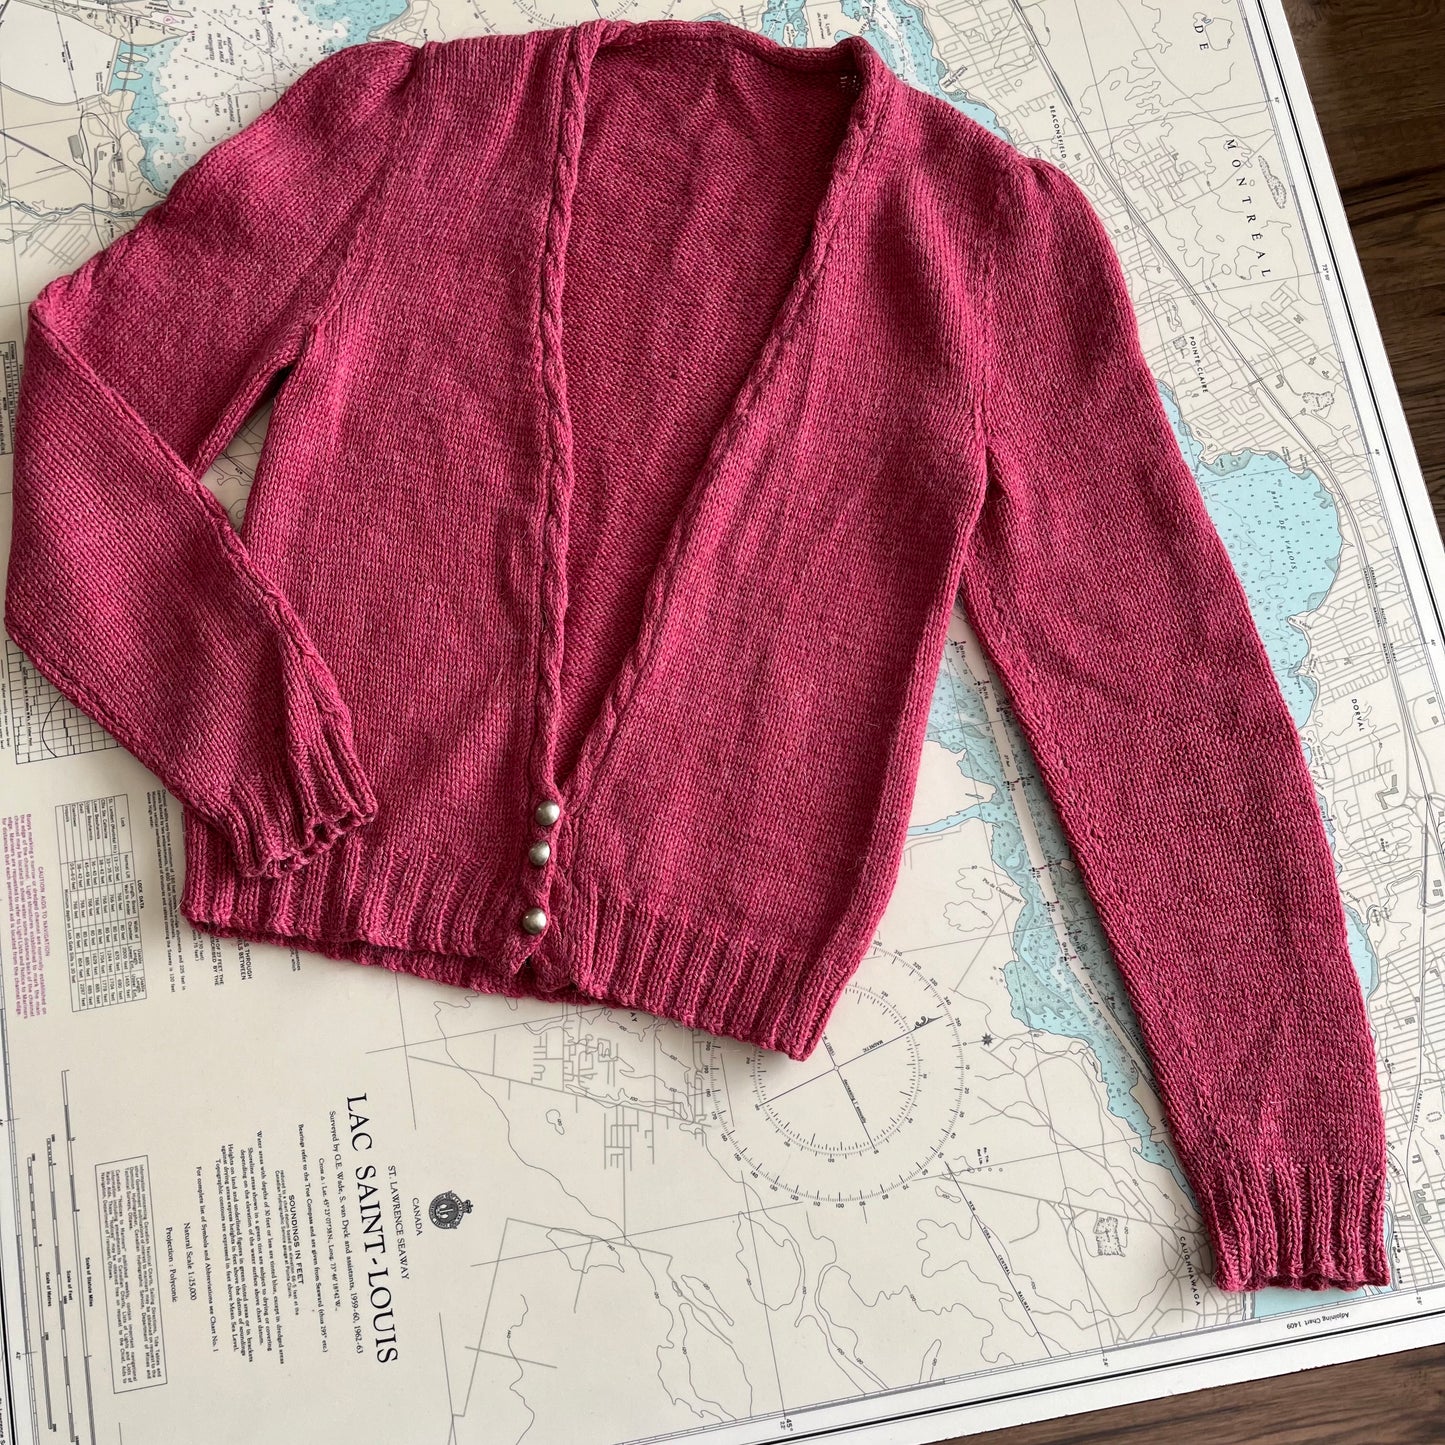 Vintage Pink Knit Cardigan with Pearl Buttons